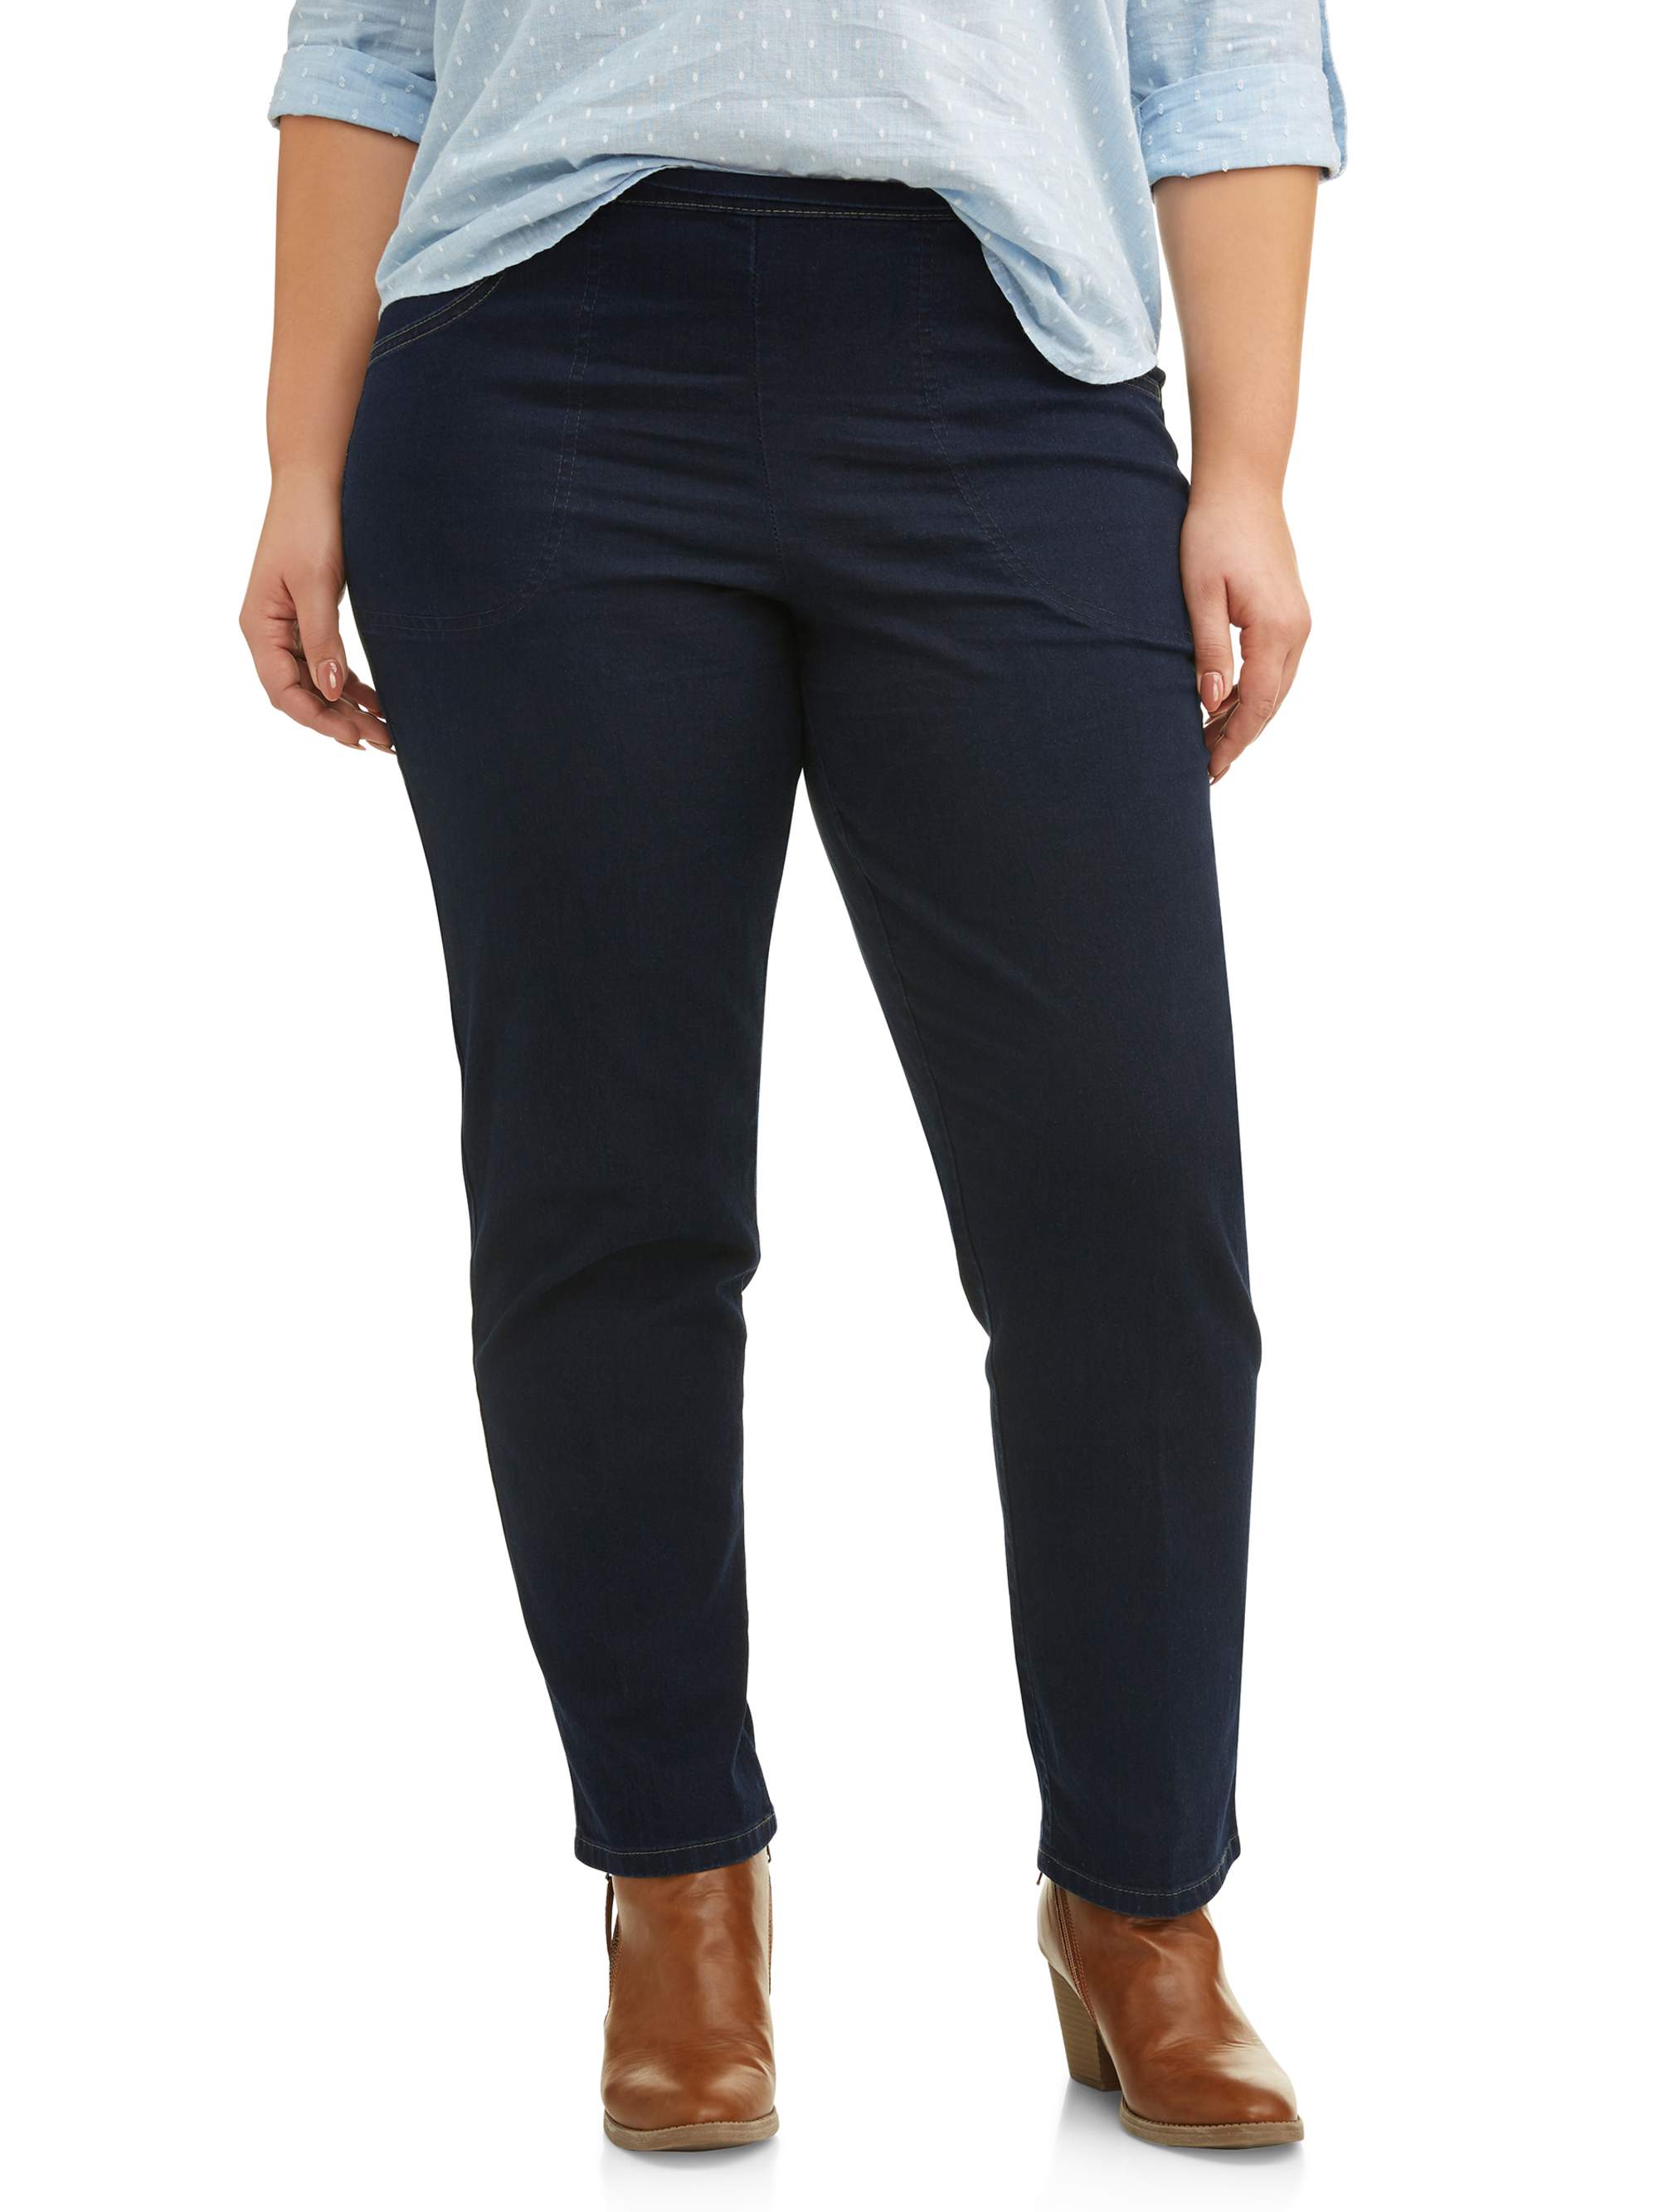 Just My Size Women's Plus 2 Pocket Pull-On Pant - image 1 of 7